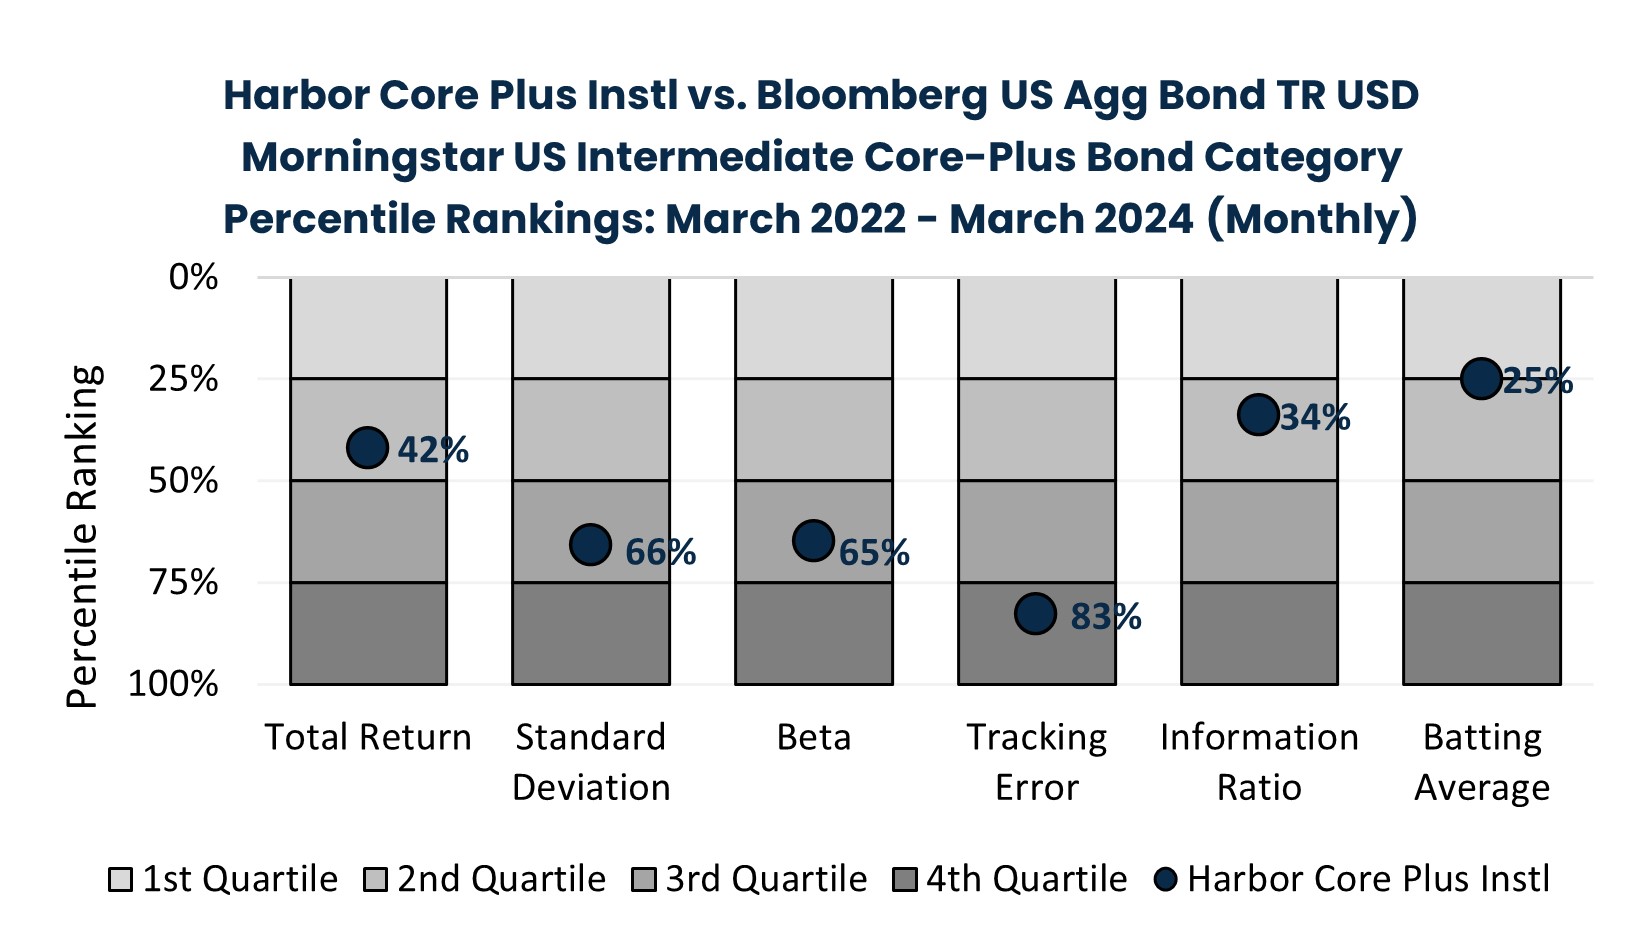 Harbor Core Plus Instl vs. Bloomberg US Agg Bond TR USD Morningstar US Intermediate Core-Plus Bond Category Percentile Rankings: March 2022 - March 2024 (Monthly)